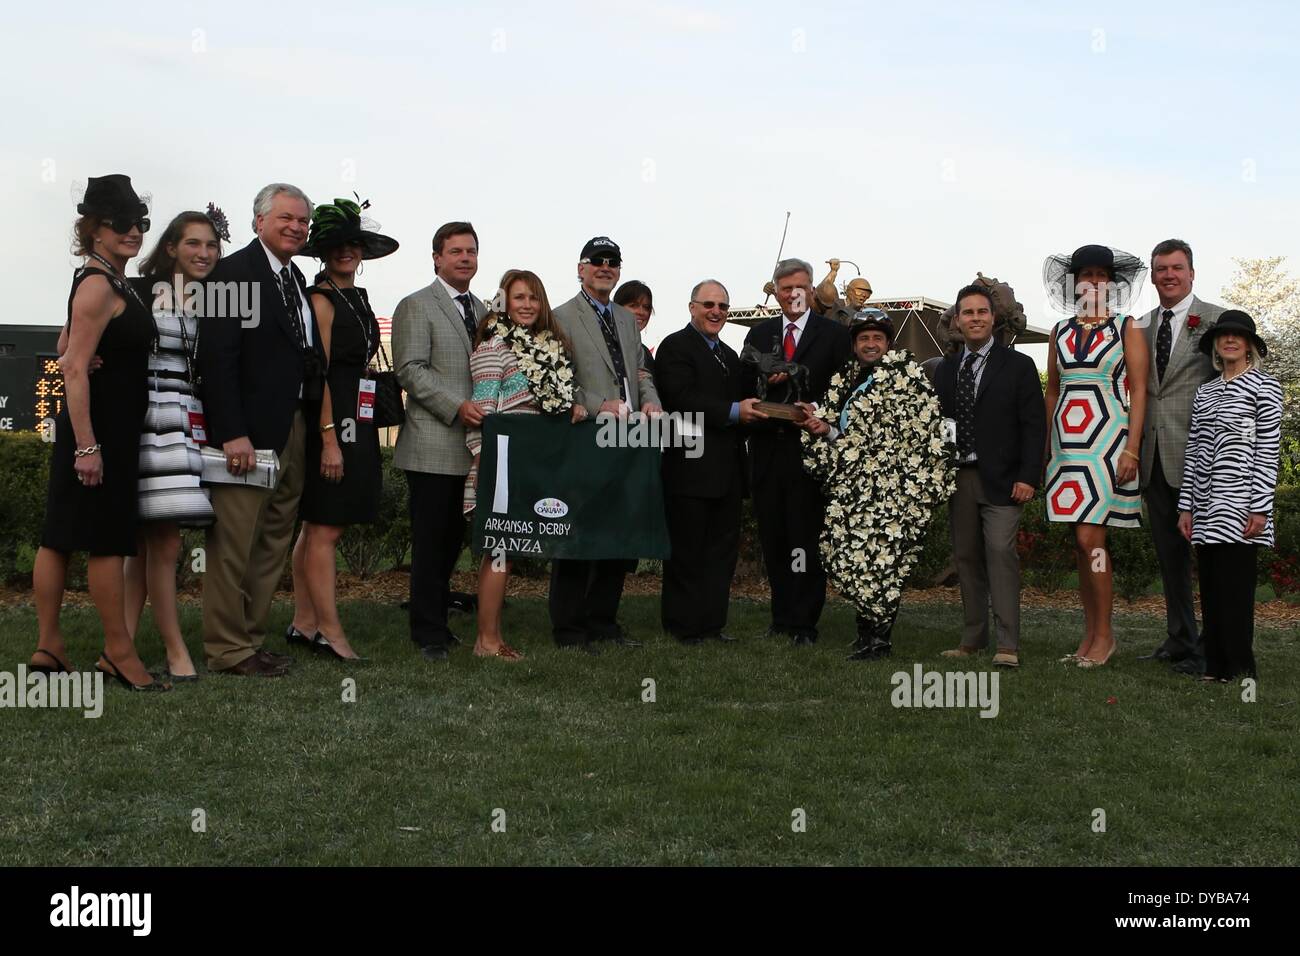 Hot Springs, AR, USA. 12th Apr, 2014. April 12, 2014: Winners circle with Arkansas Governor Mike Beebe and jockey Joe Bravo after the running of the Arkansas Derby at Oaklawn Park in Hot Springs, AR. Justin Manning/ESW/CSM/Alamy Live News Stock Photo